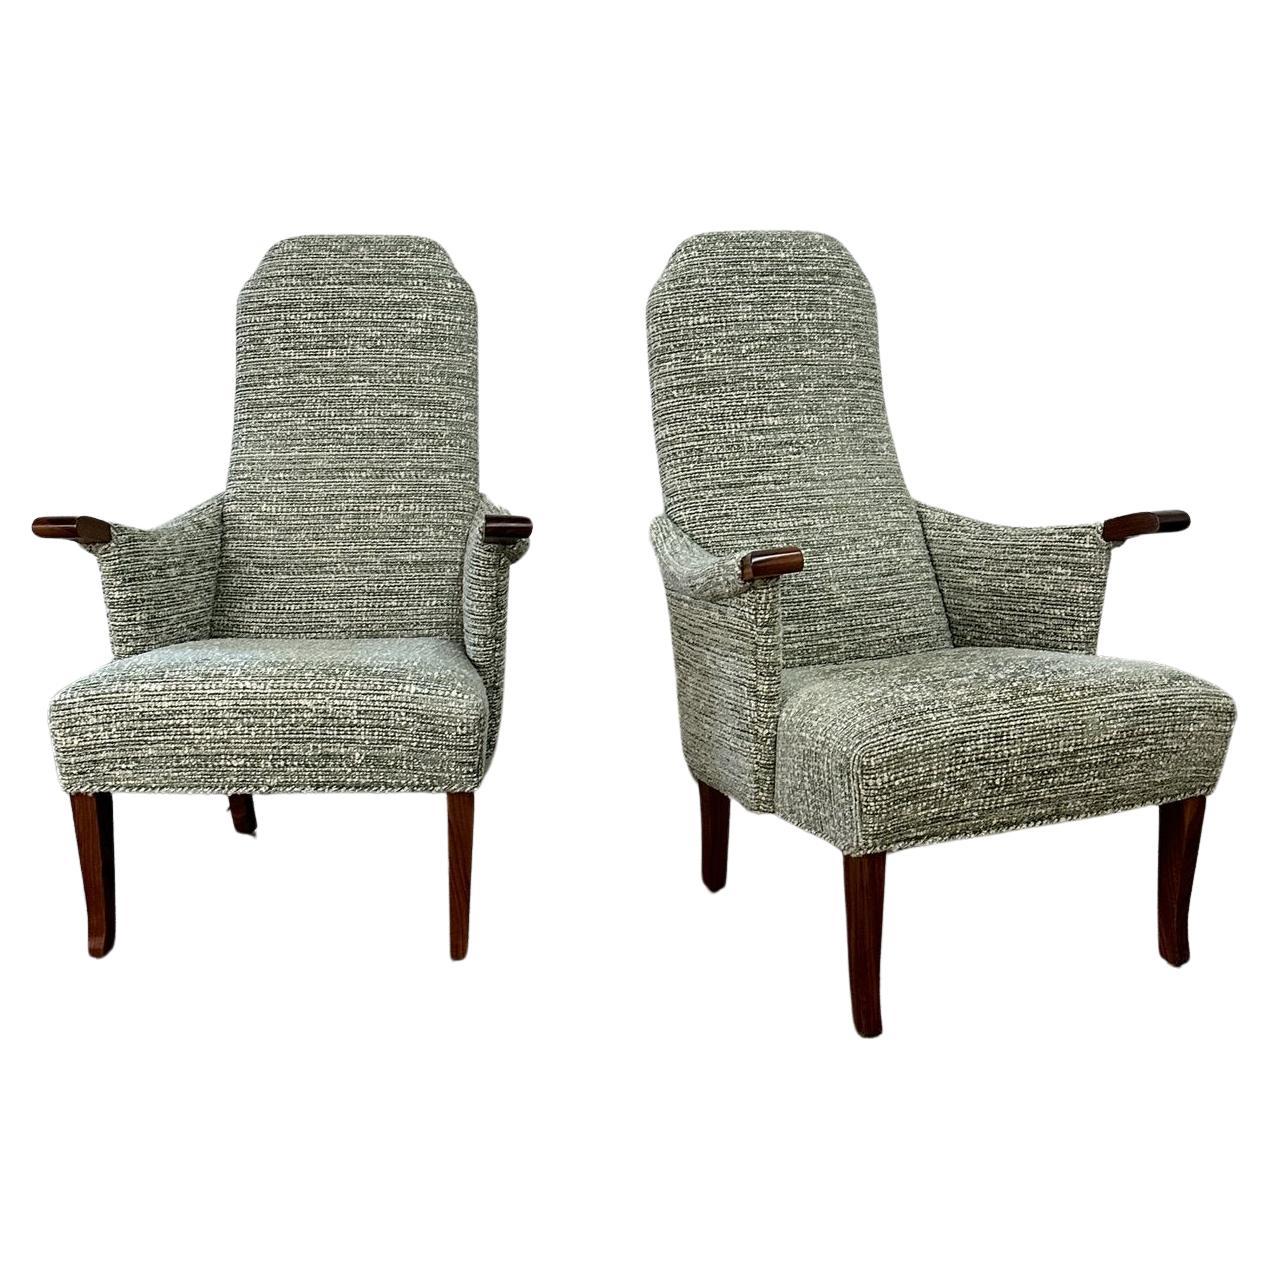 Solna Lounge Chair - pair For Sale